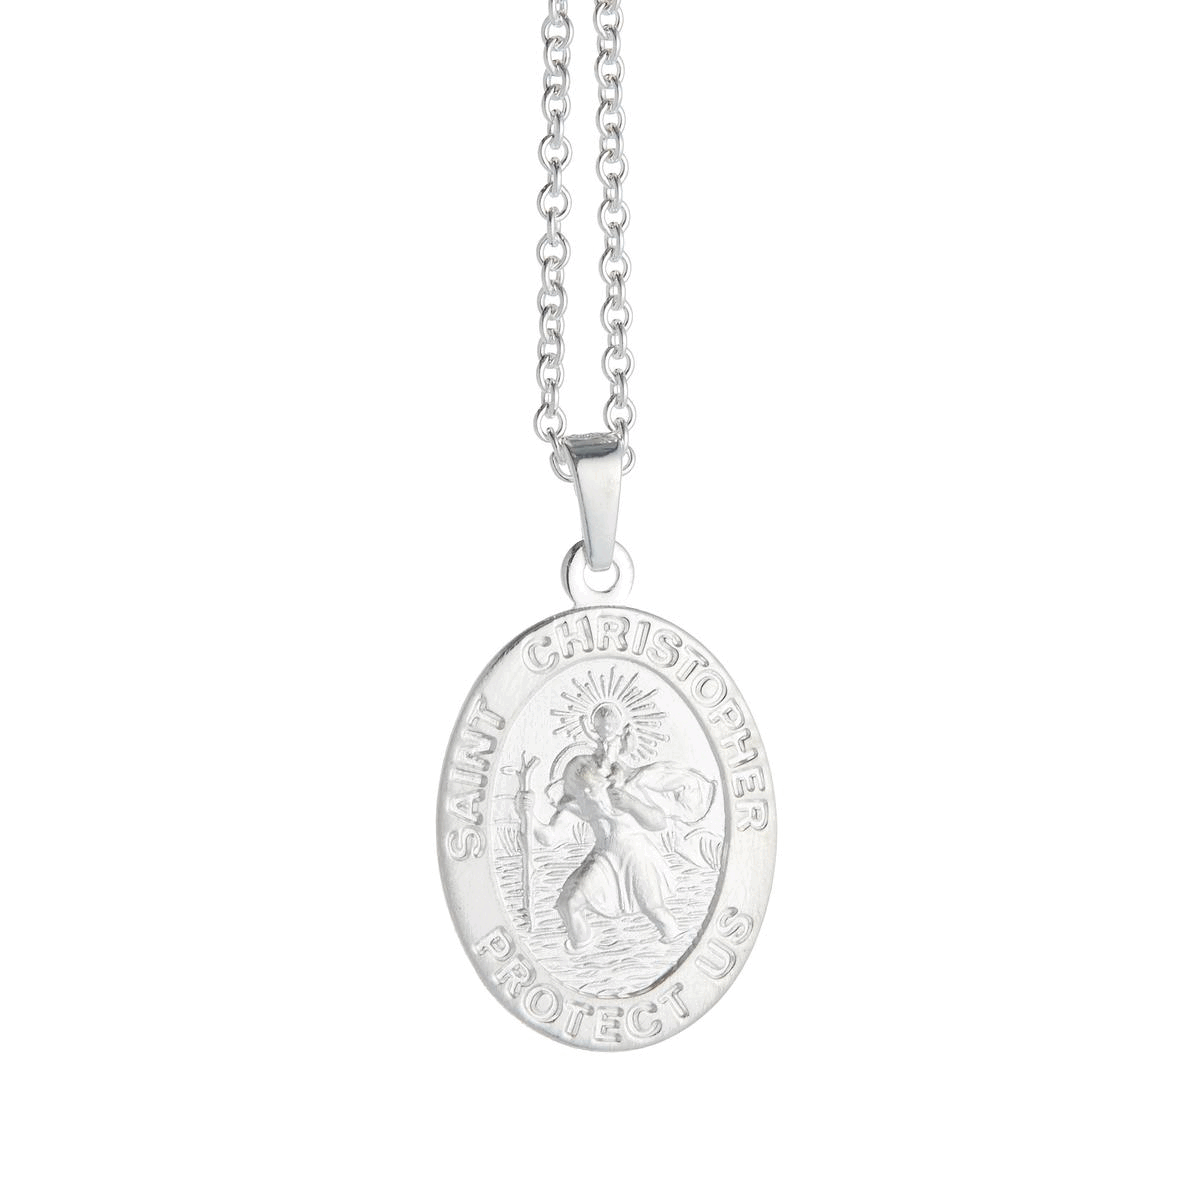 silver oval saint christopher necklace trace chain for women or men